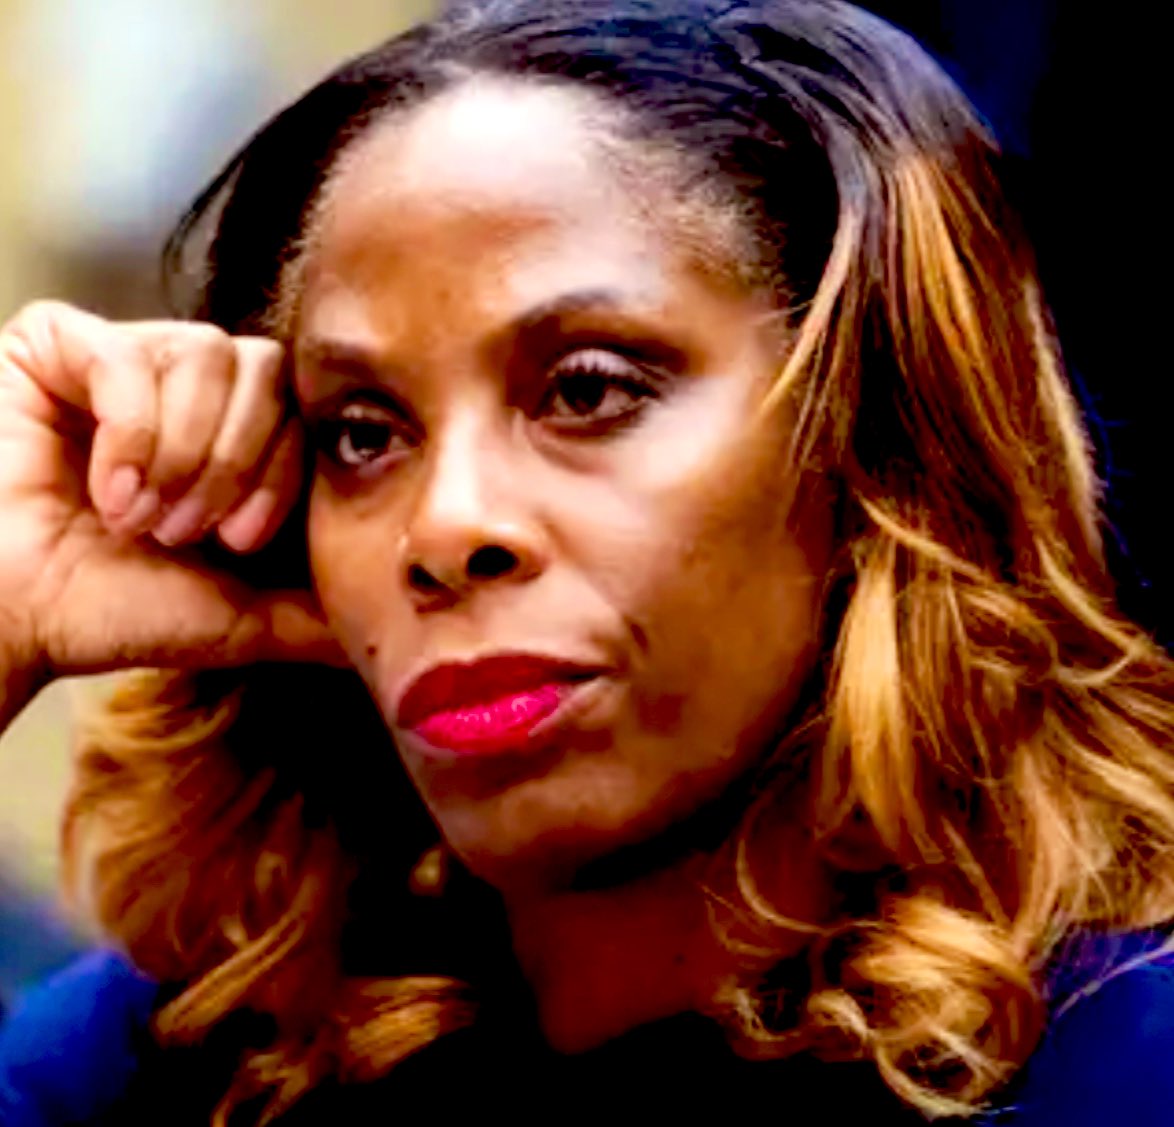 Stacey Plaskett is just a vile, nasty, and disgusting human being! Who Agrees?